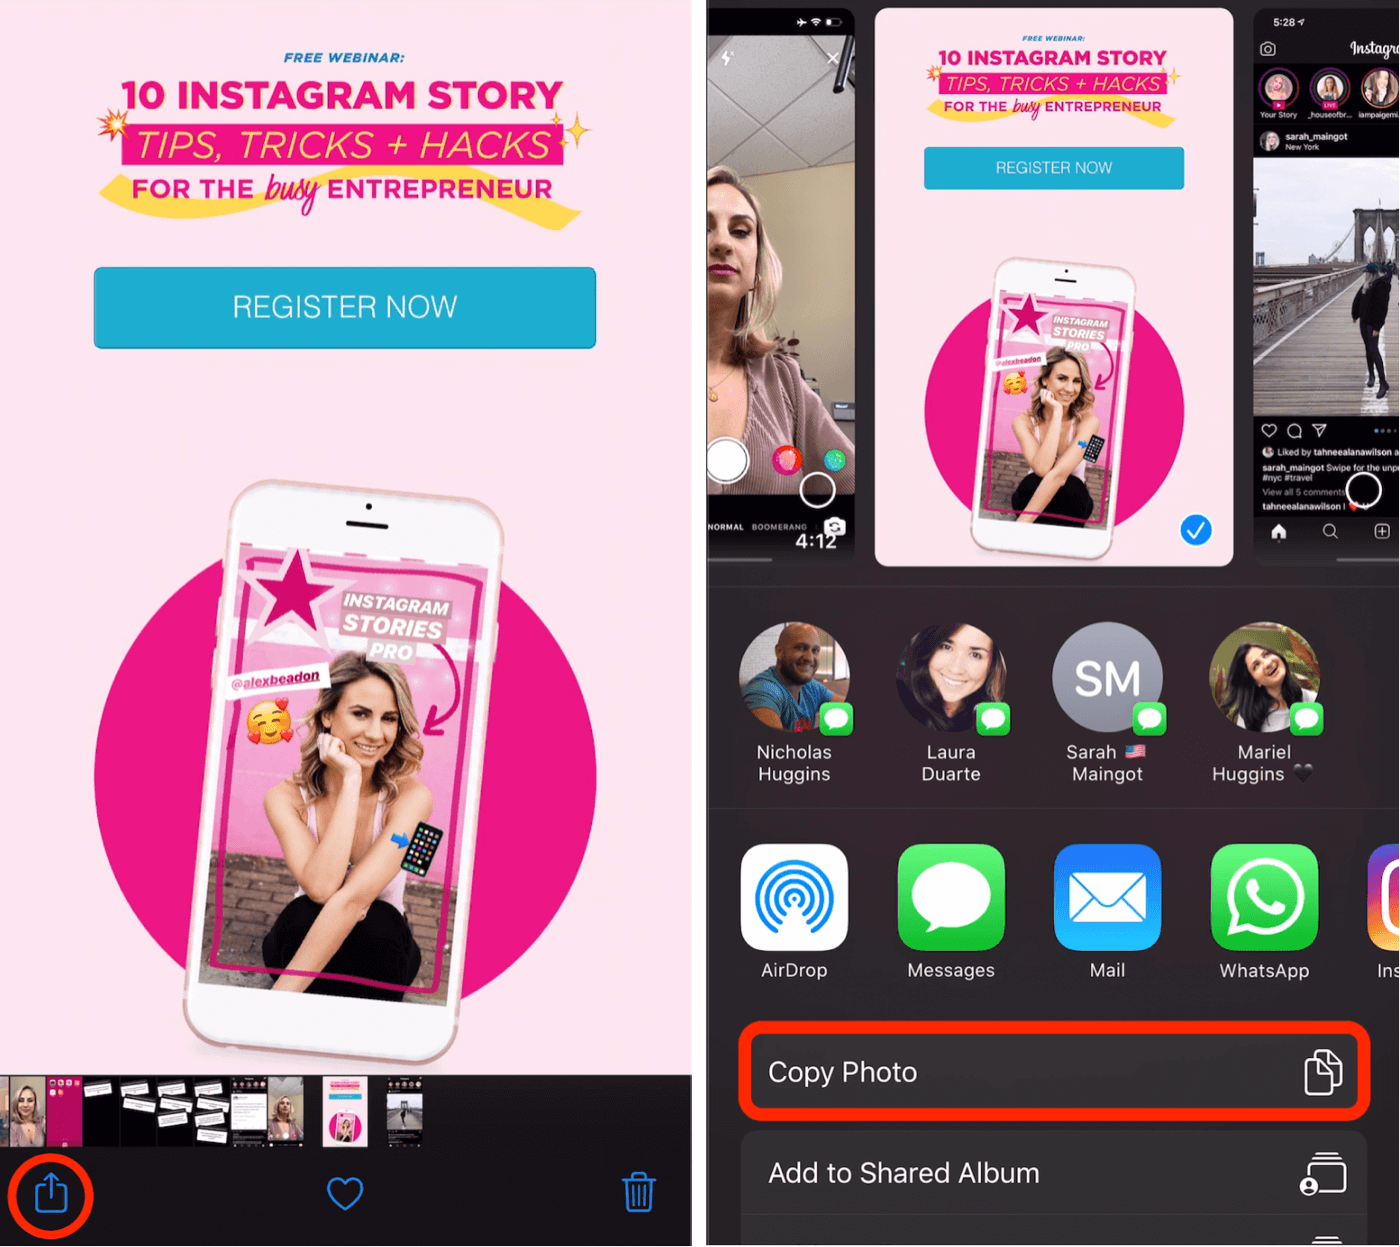 add extra image to Instagram story